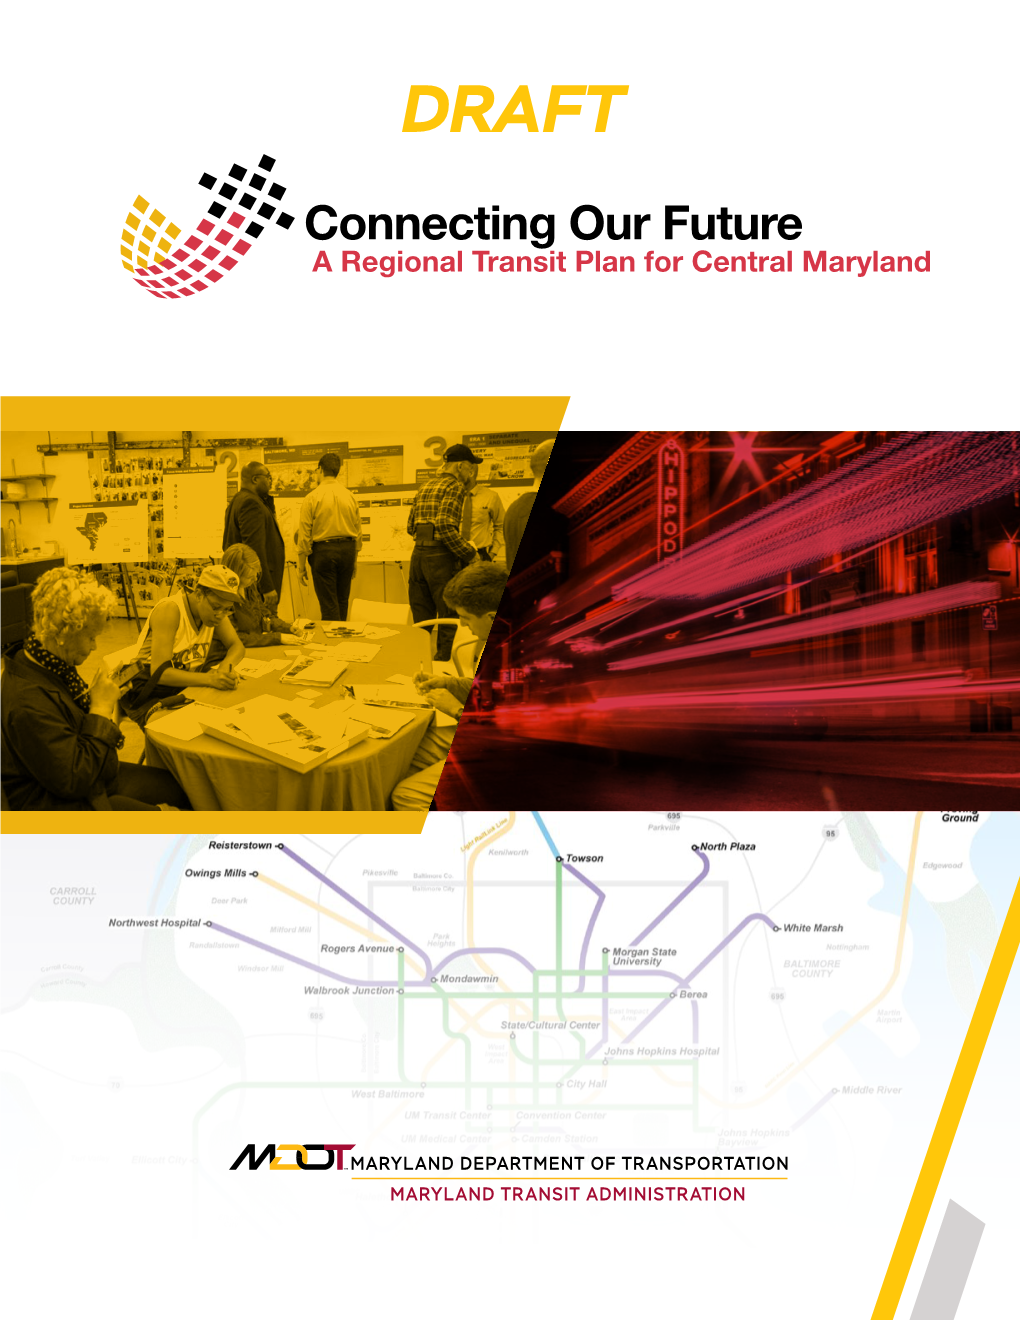 Connecting Our Future: a Regional Transit Plan for Central Maryland